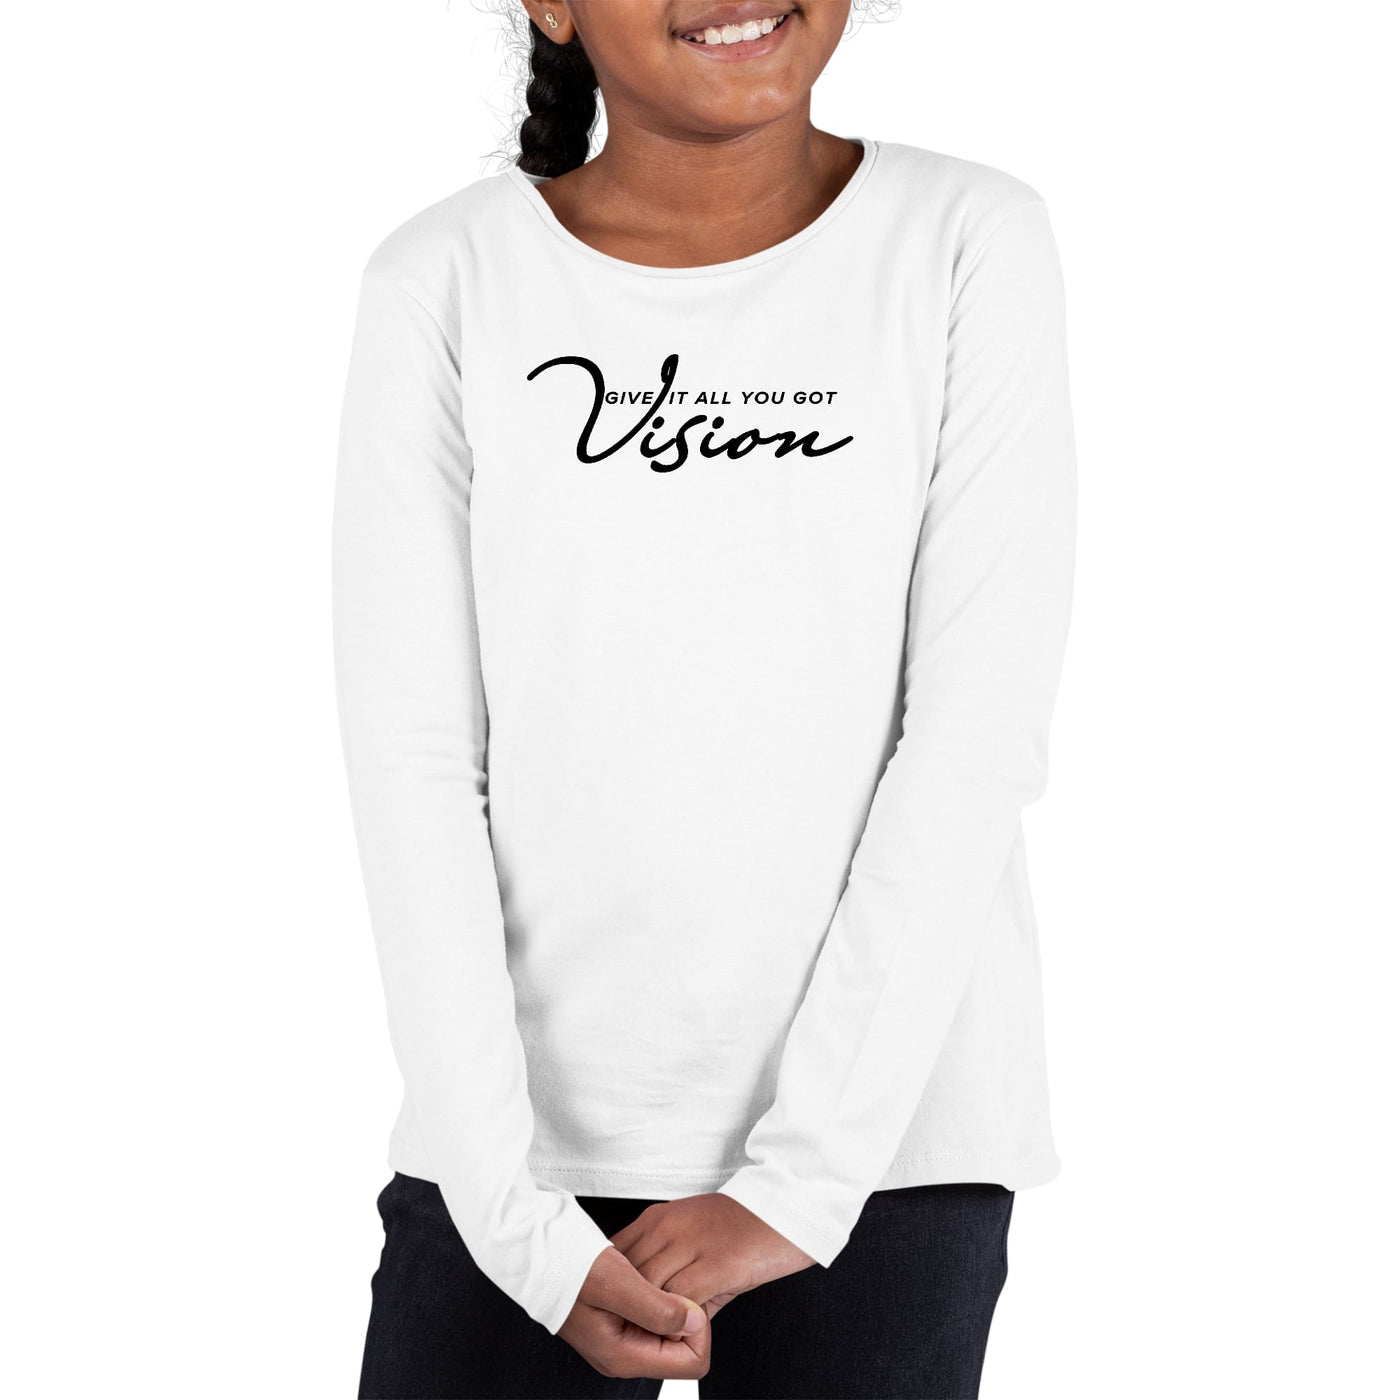 Youth Long Sleeve T - shirt Vision - Give It All You Got Black Girls | T